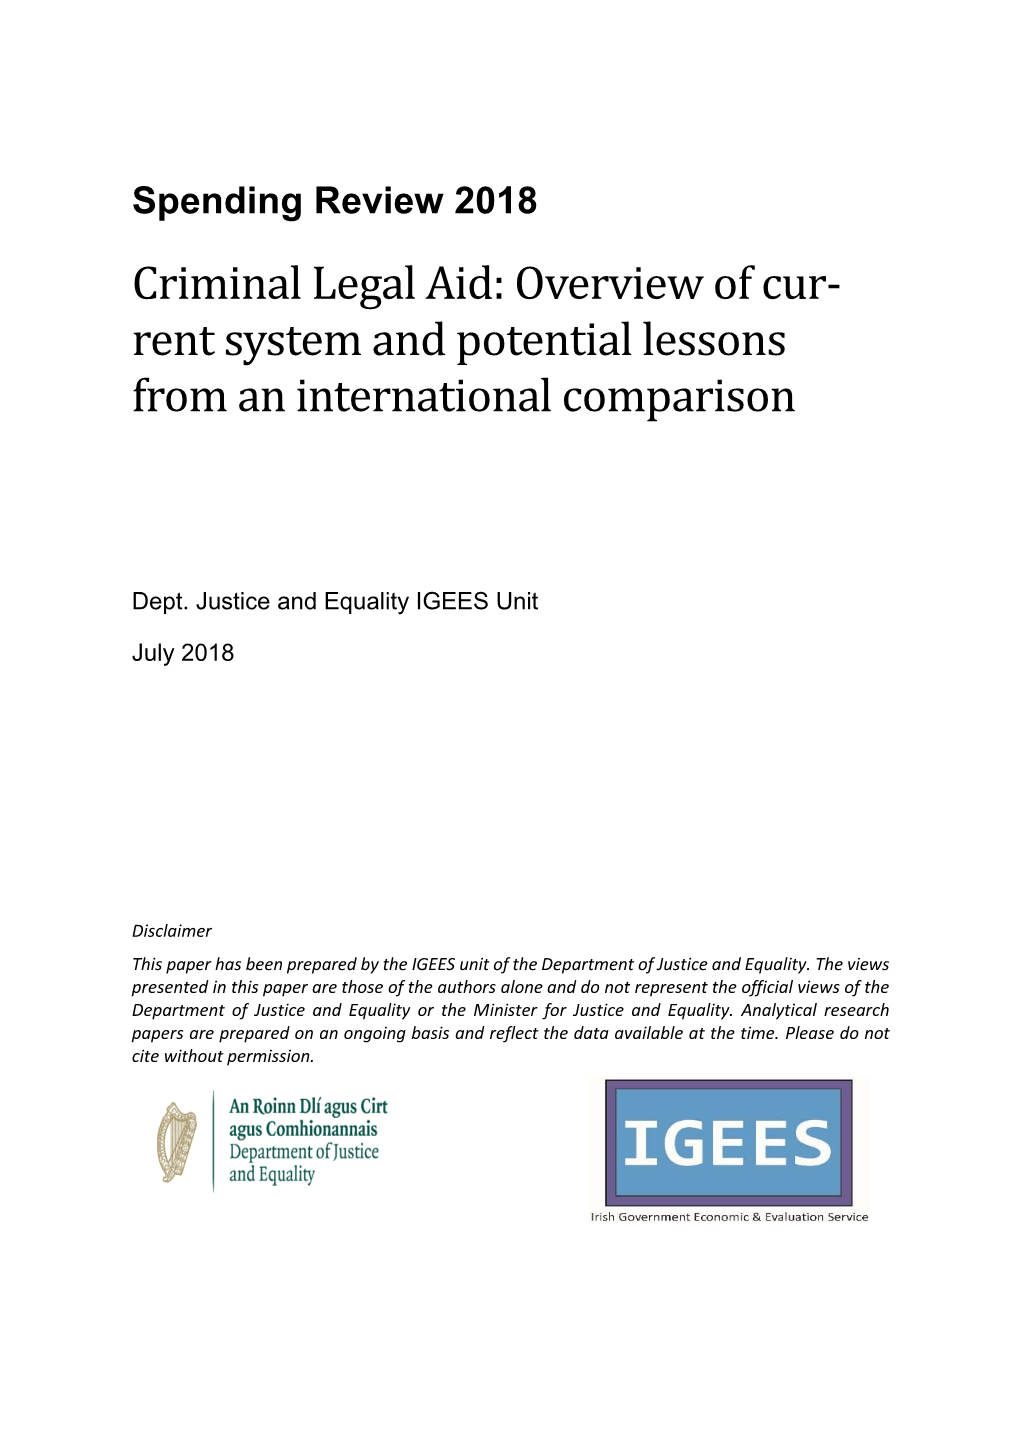 Criminal Legal Aid: Overview of Cur- Rent System and Potential Lessons from an International Comparison